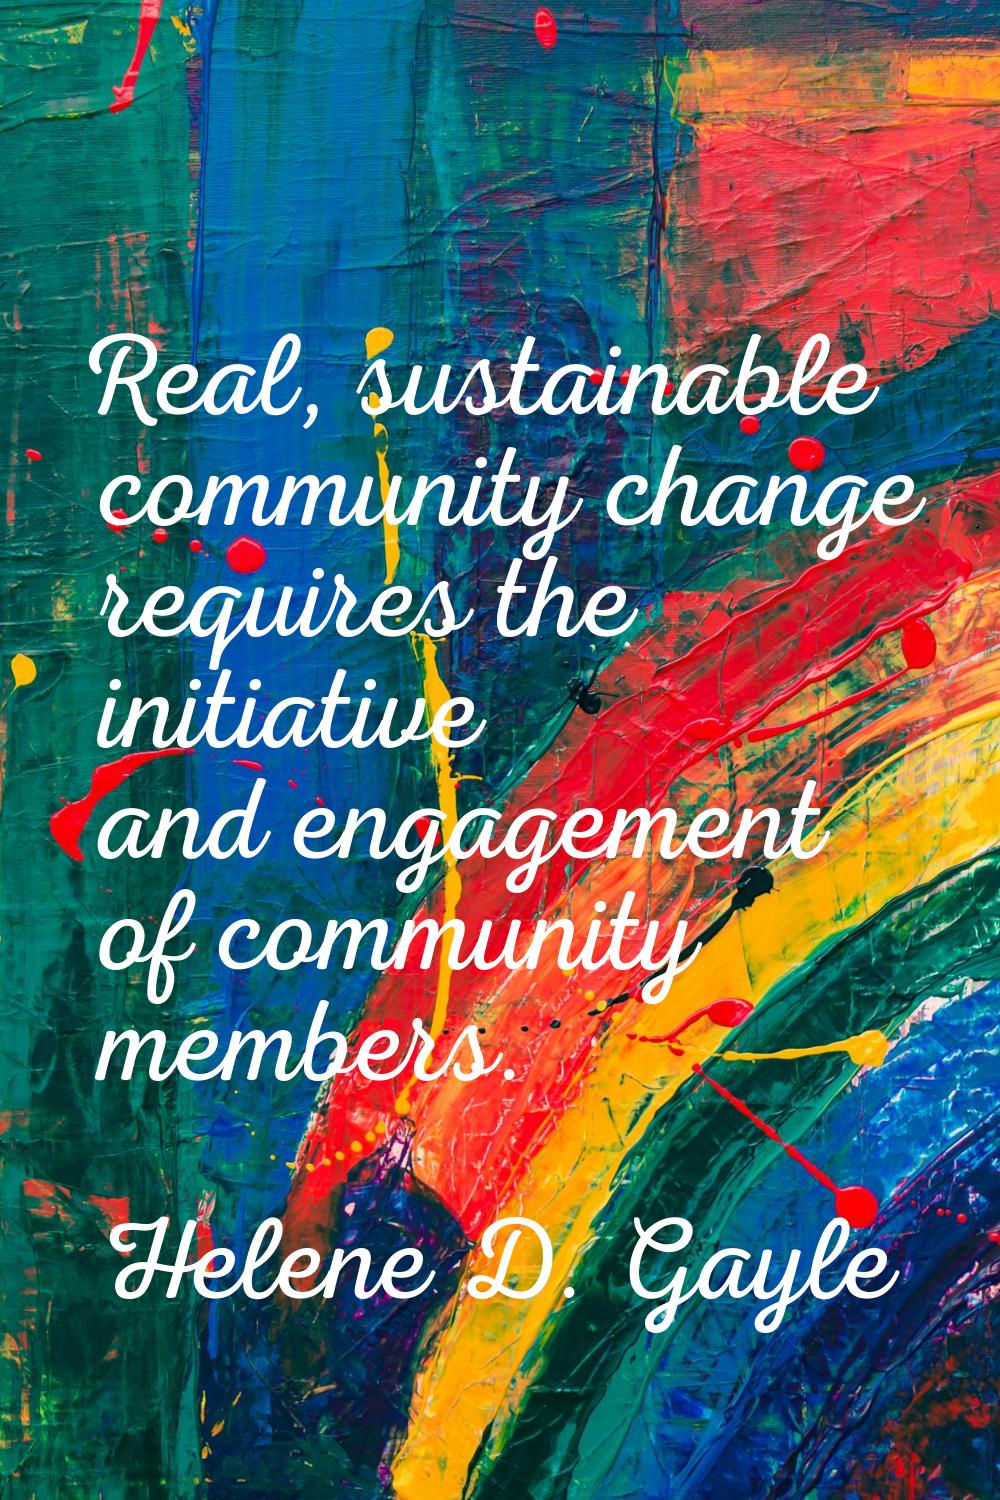 Real, sustainable community change requires the initiative and engagement of community members.